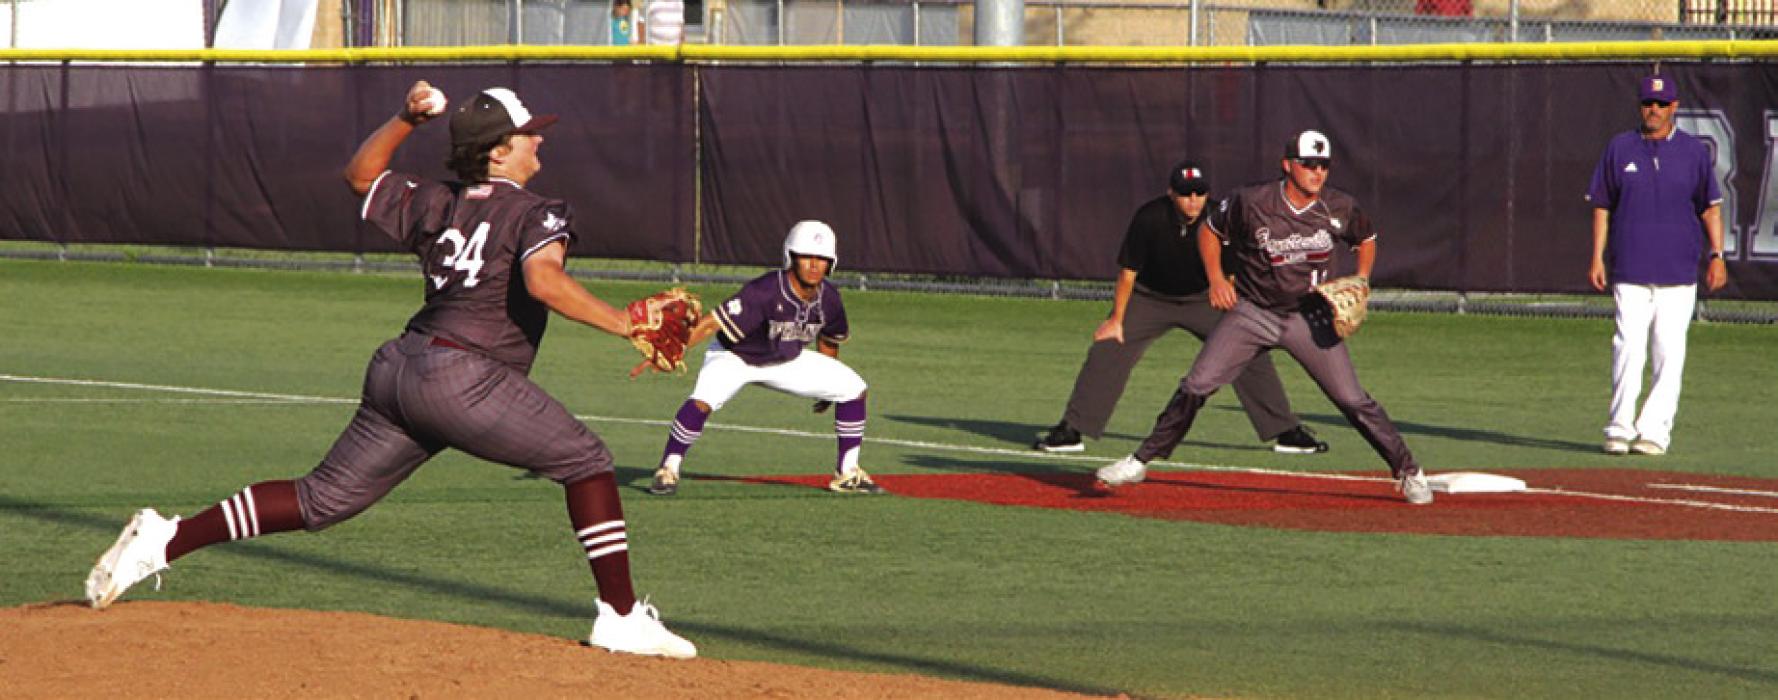 Fayetteville Bashes D’Hanis in Game 1 of Regional Final